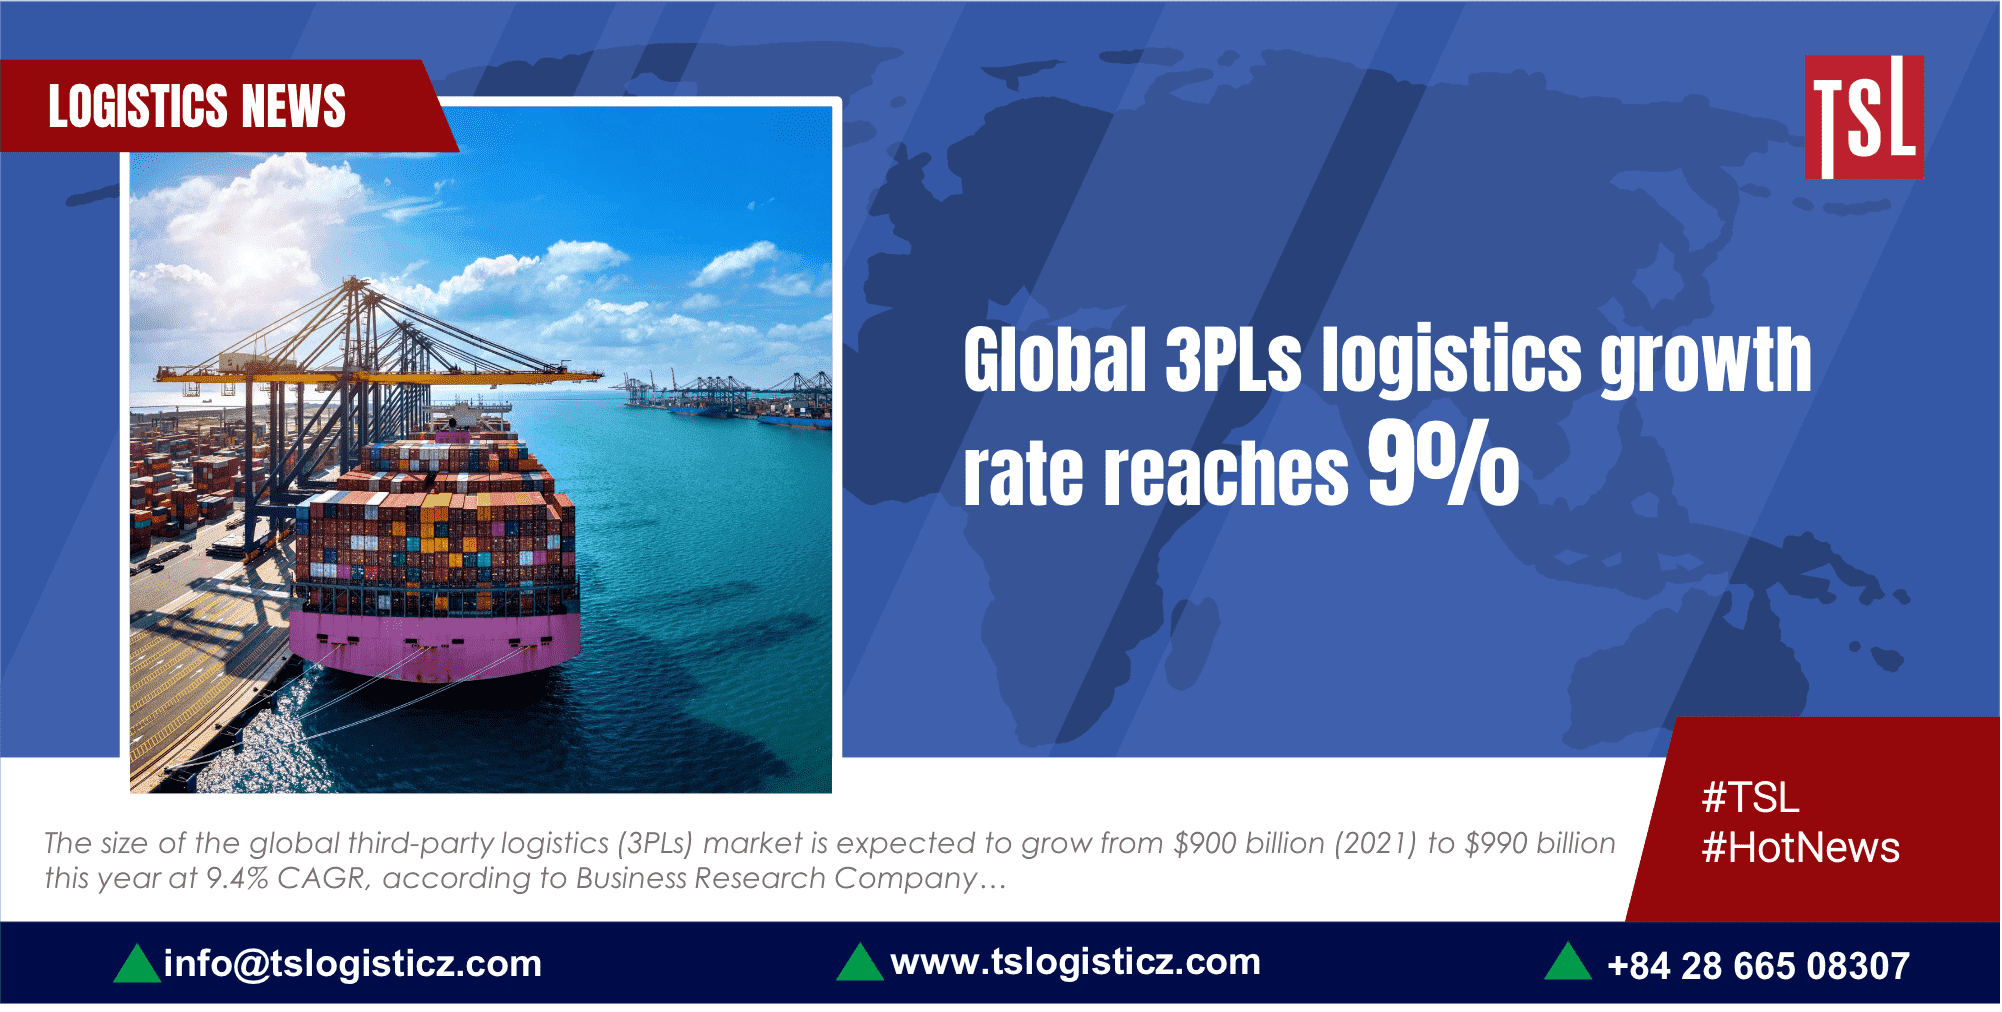 Global Third-party Logistics (3PLs) growth rate reaches 9%